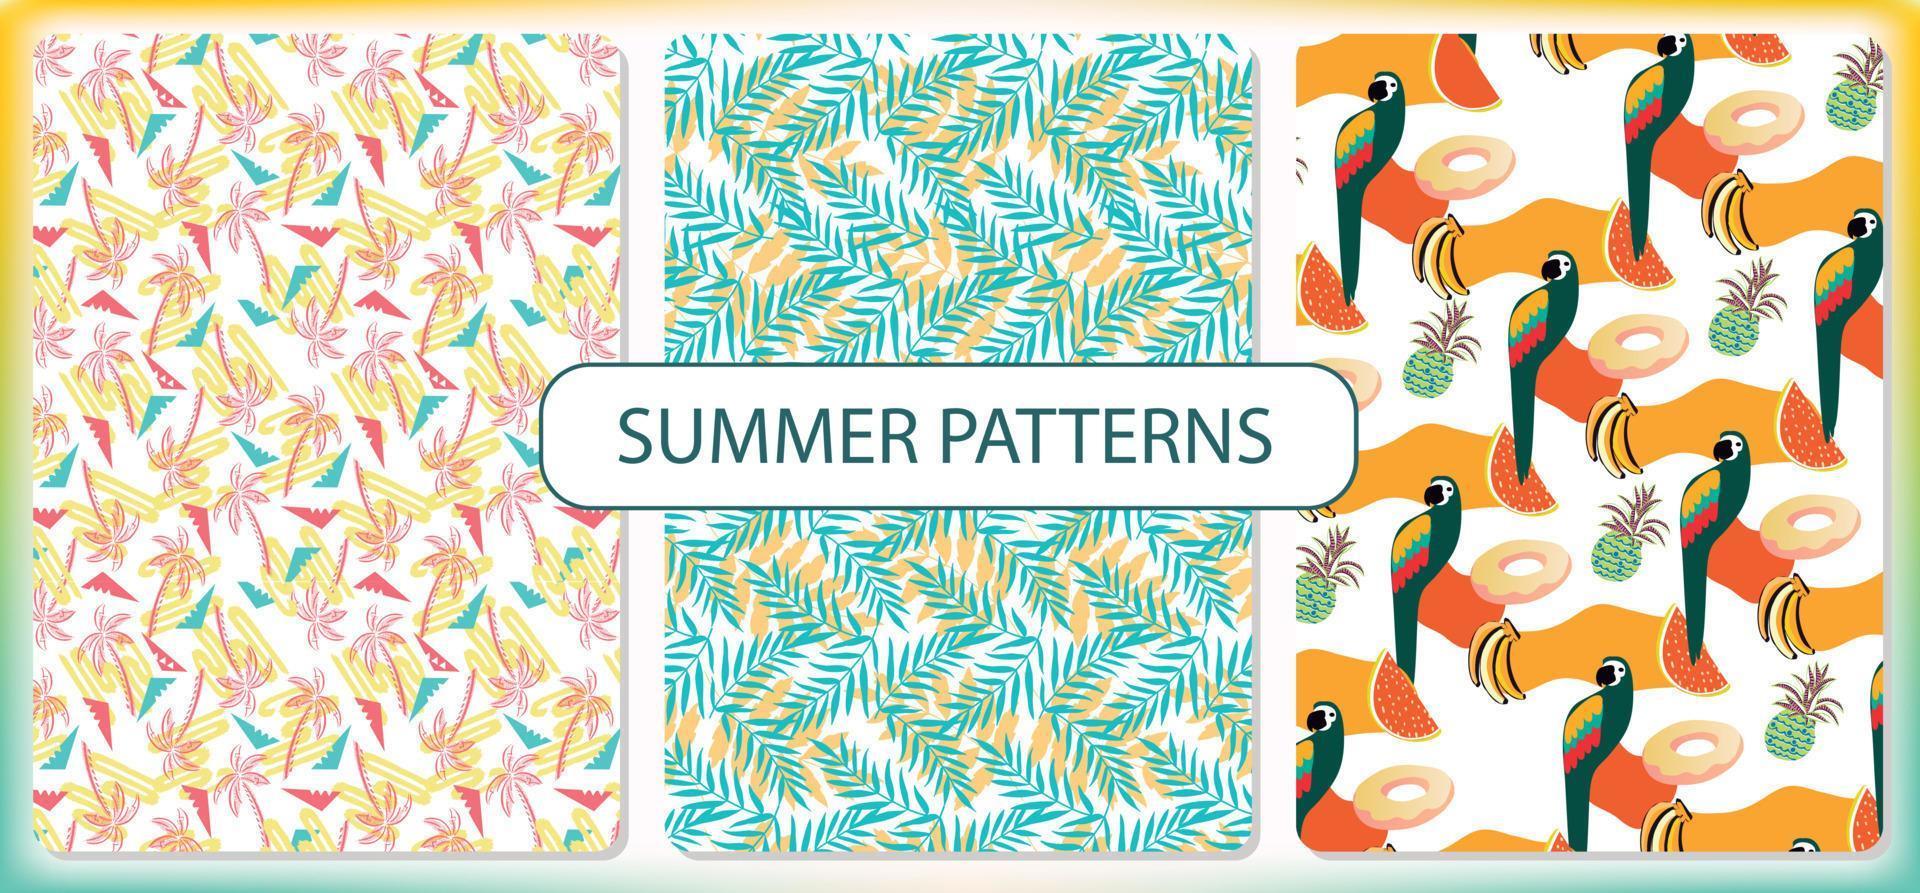 Set of repeating patterns with simple summer and tropical motifs. surface patterns to decorate. vector